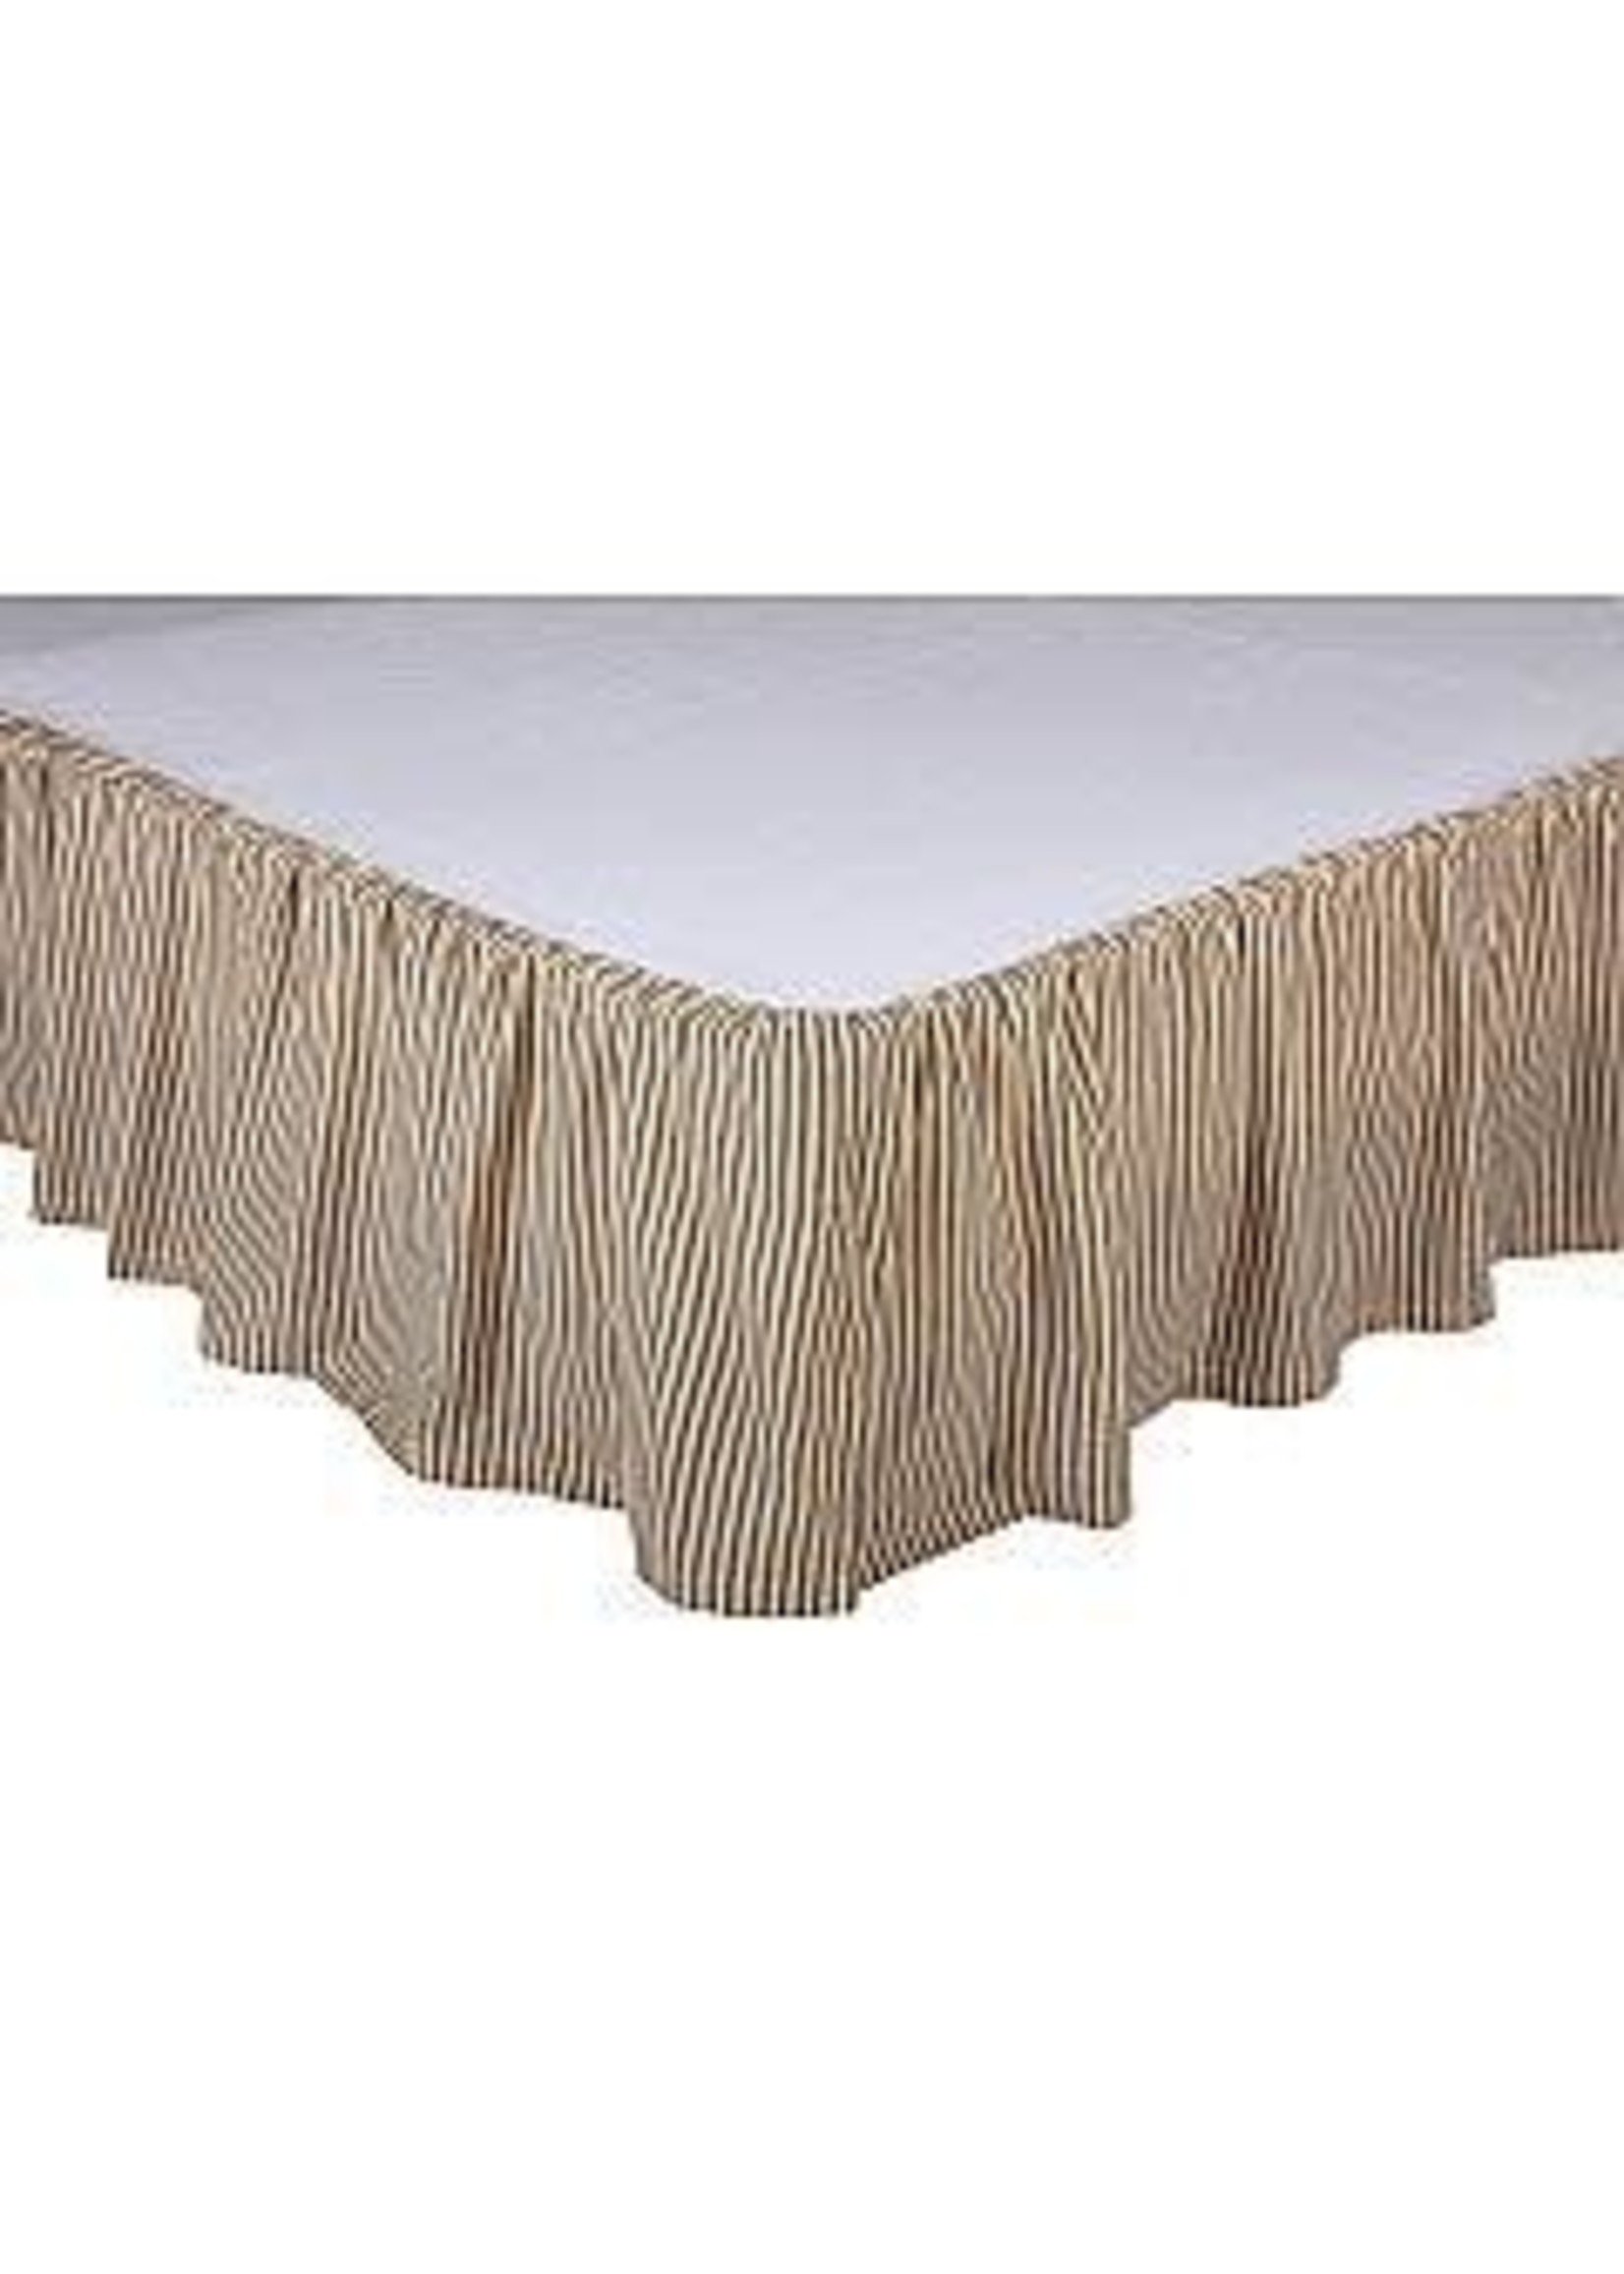 VHC SAWYER MILL QUEEN CHARCOAL BED SKIRT